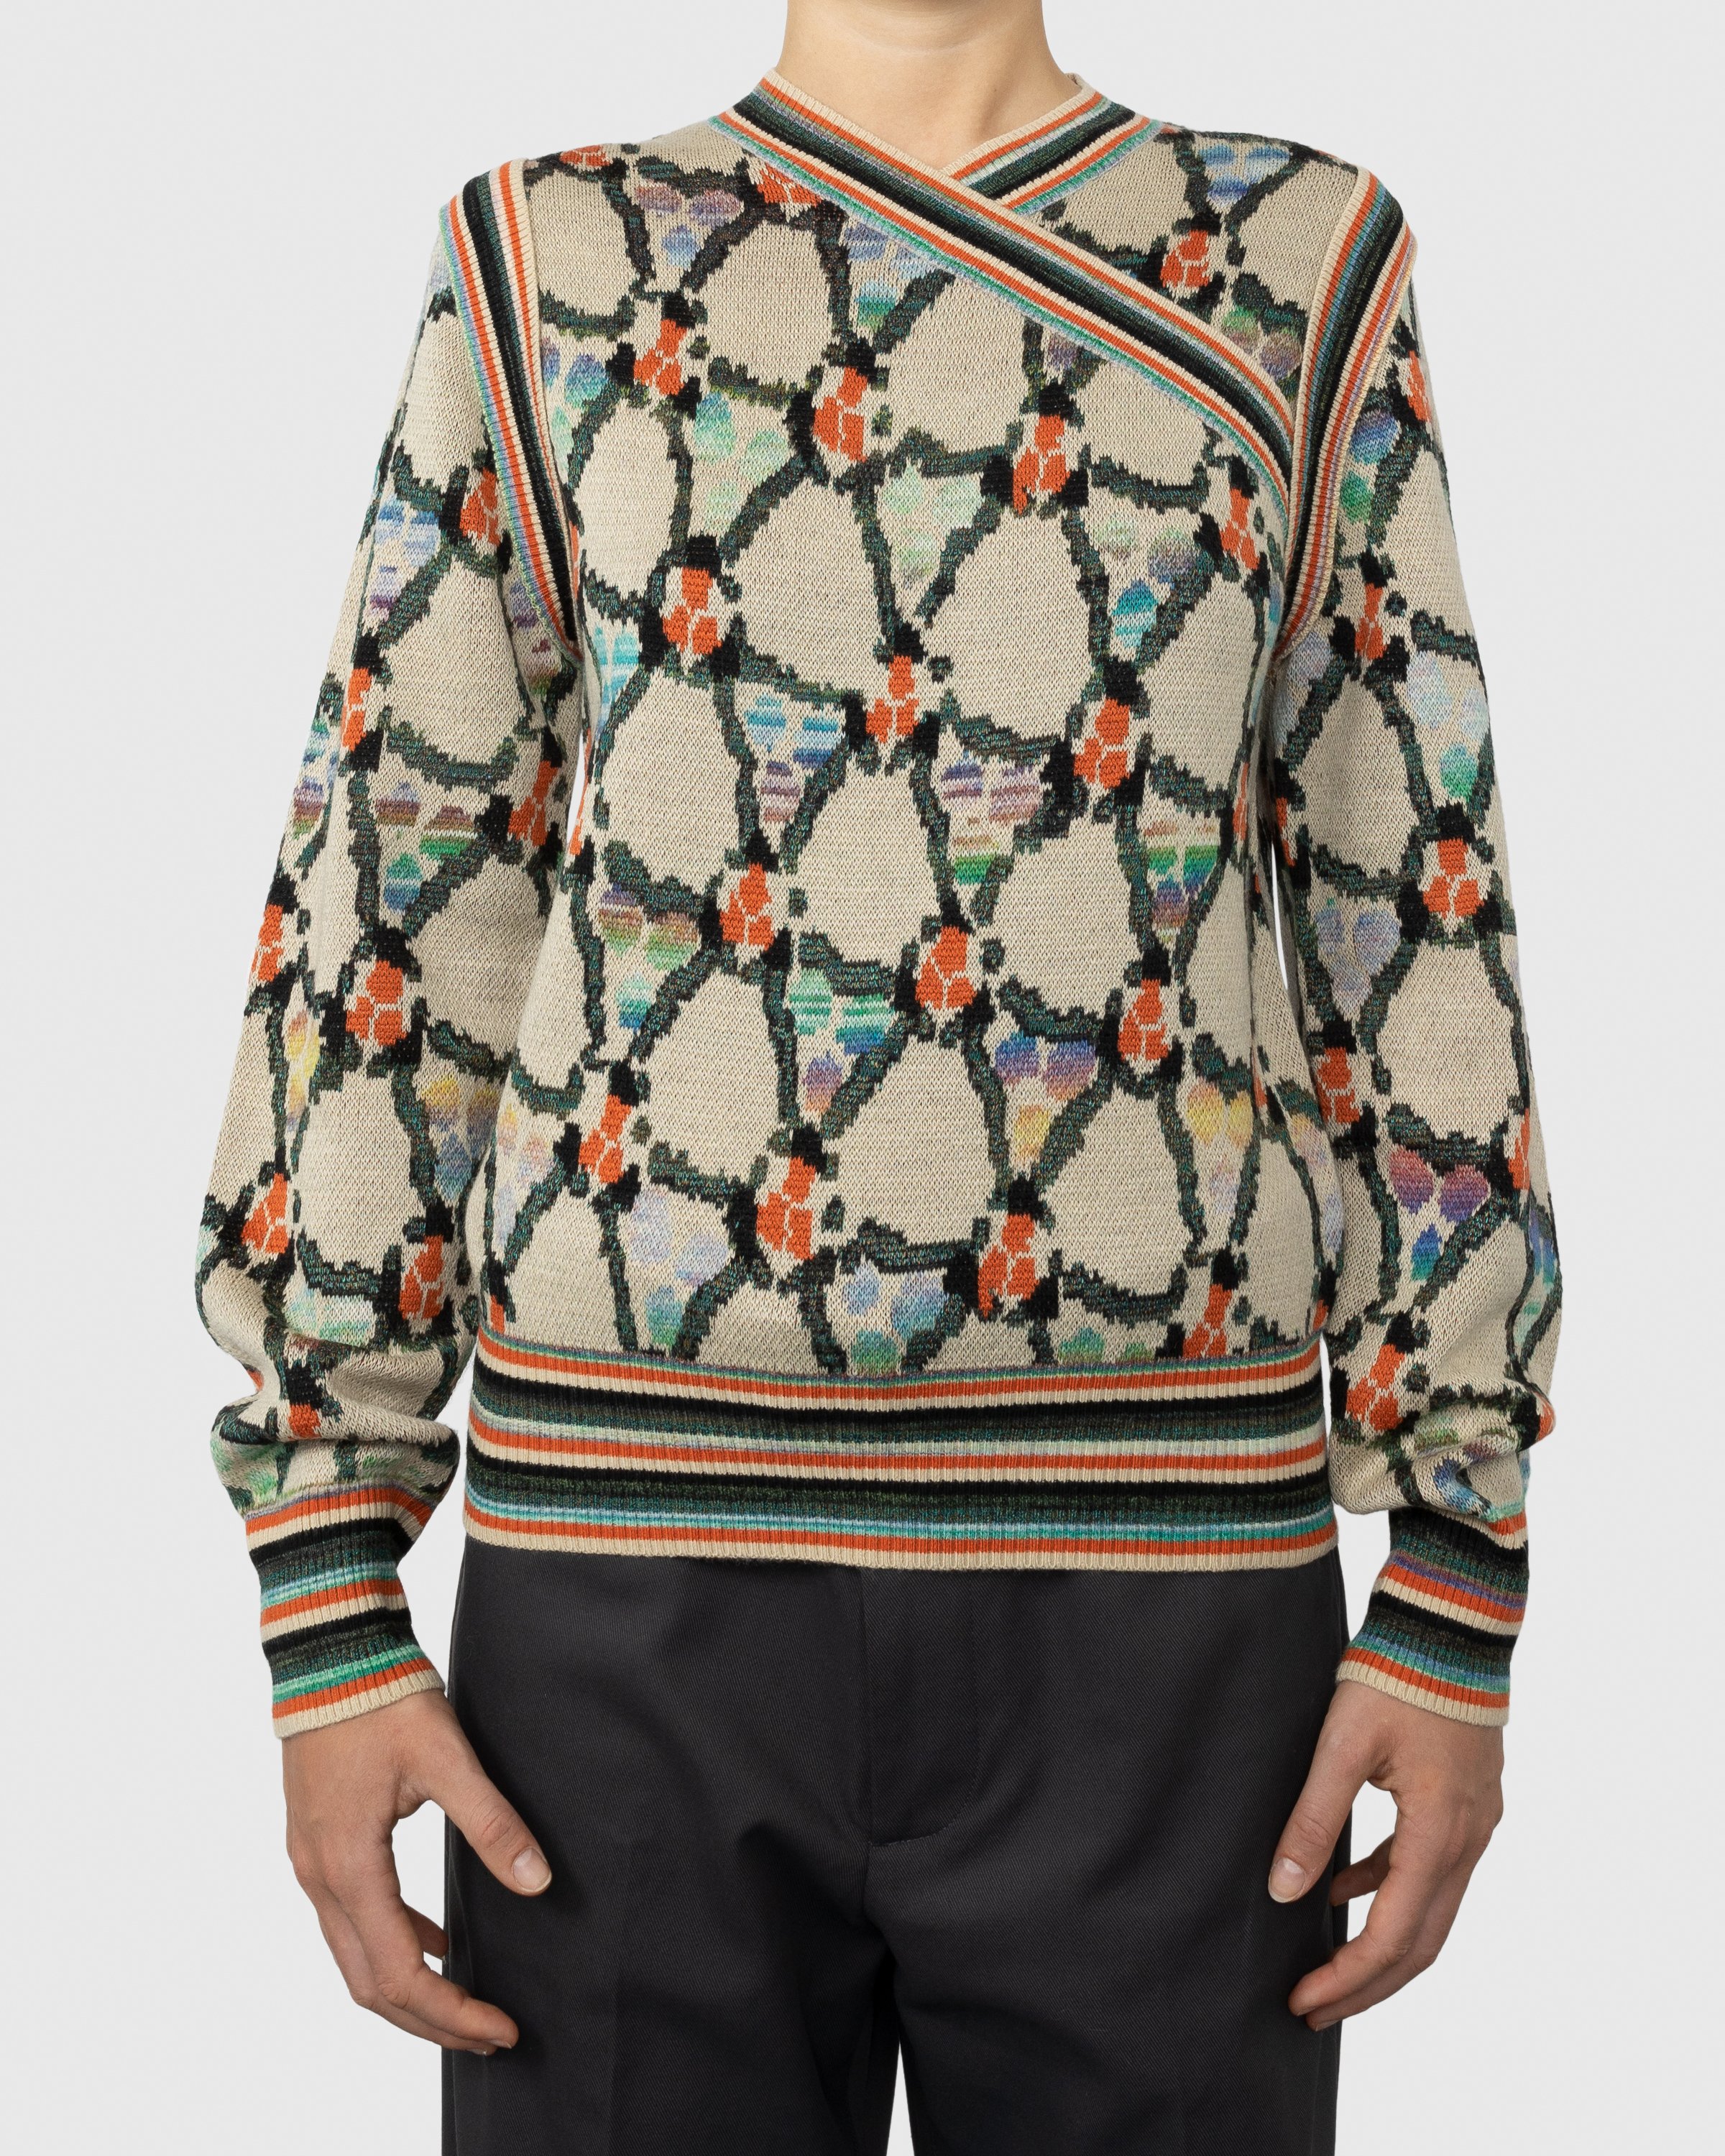 Acne Studios - Wrapped Sweater Beige - Clothing - Multi - Image 2